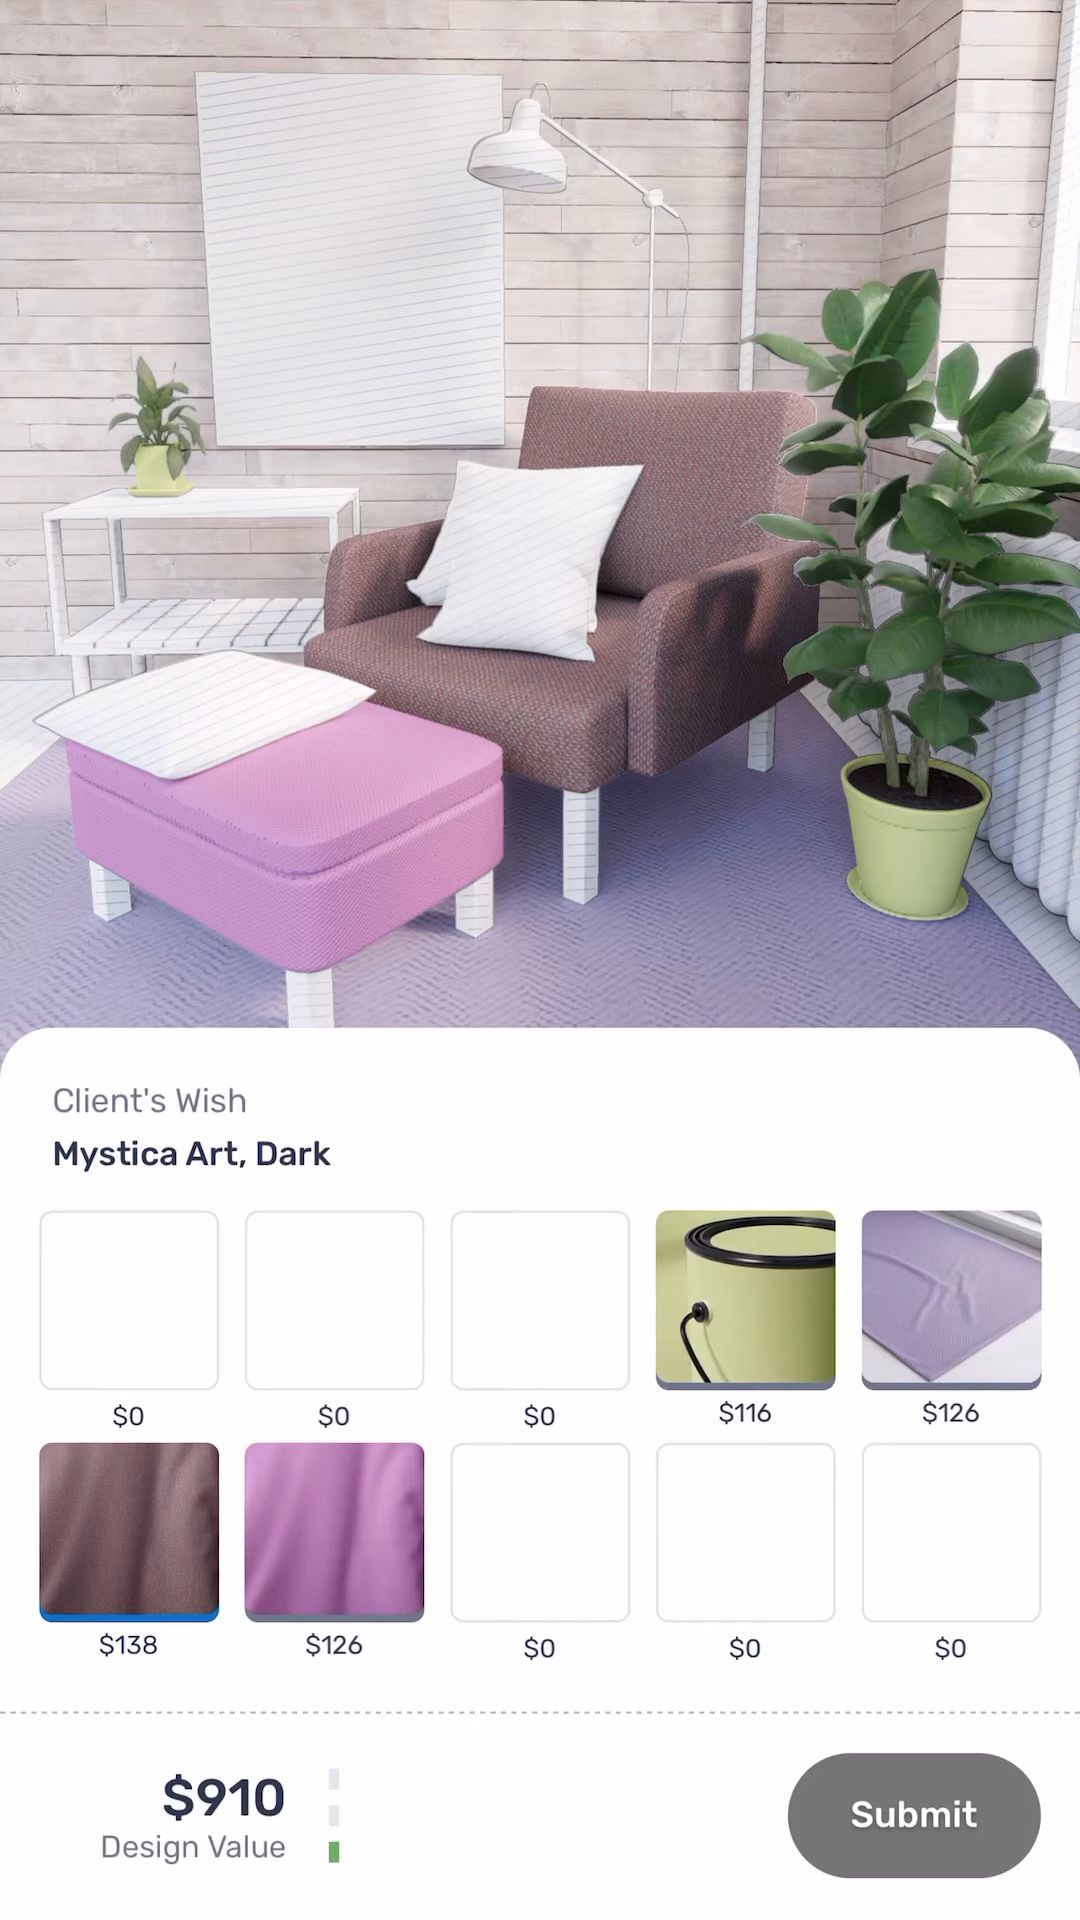 Redecor - Home Design Game for Android